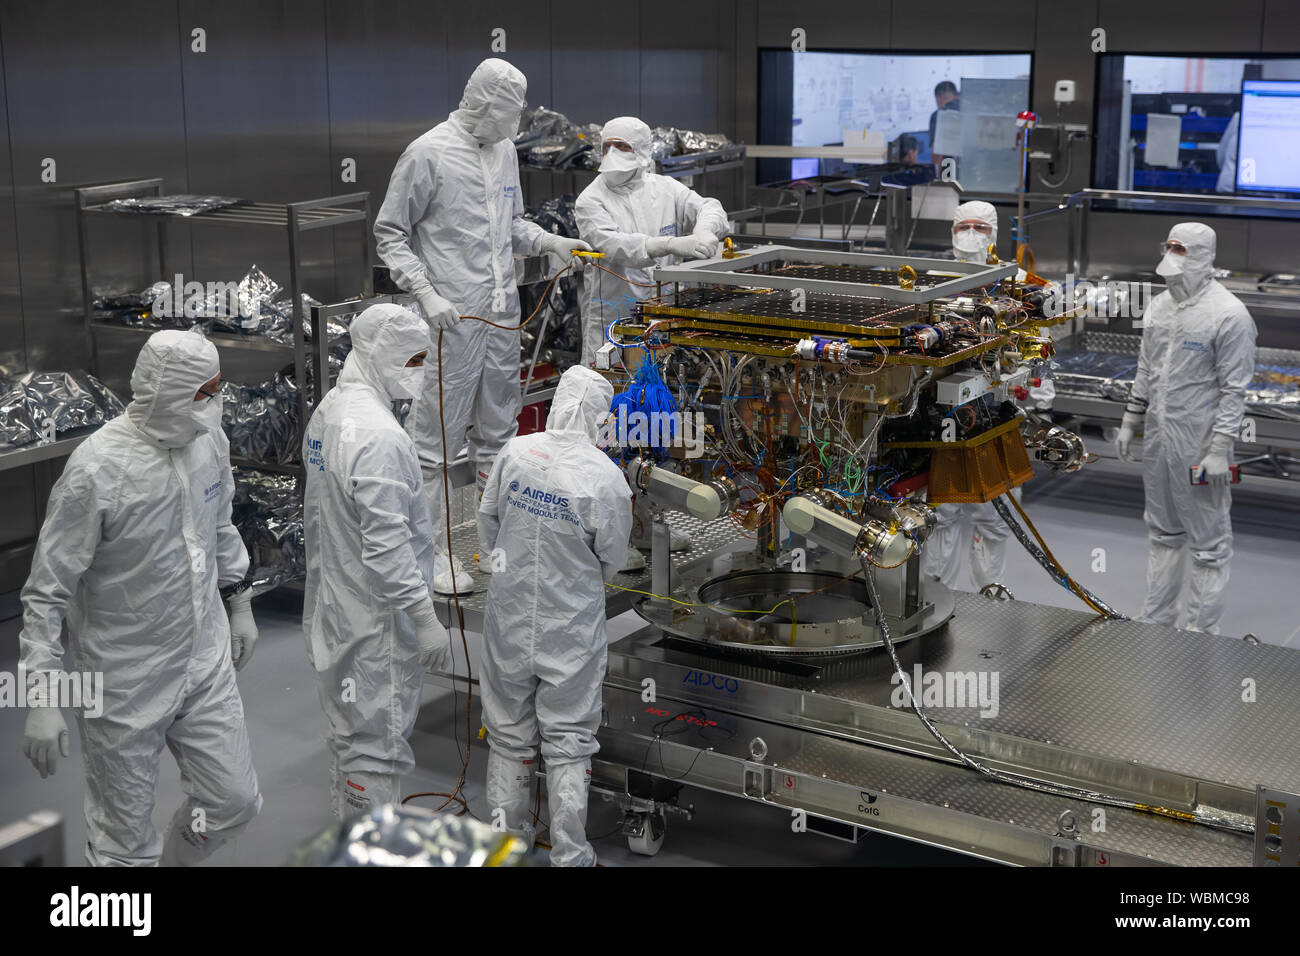 The European Space Agency's ExoMars rover is being prepared to leave Airbus in Stevenage. The ExoMars 2020 rover Rosalind Franklin is EuropeÕs first planetary rover it will search for signs of past or present life on Mars. Stock Photo